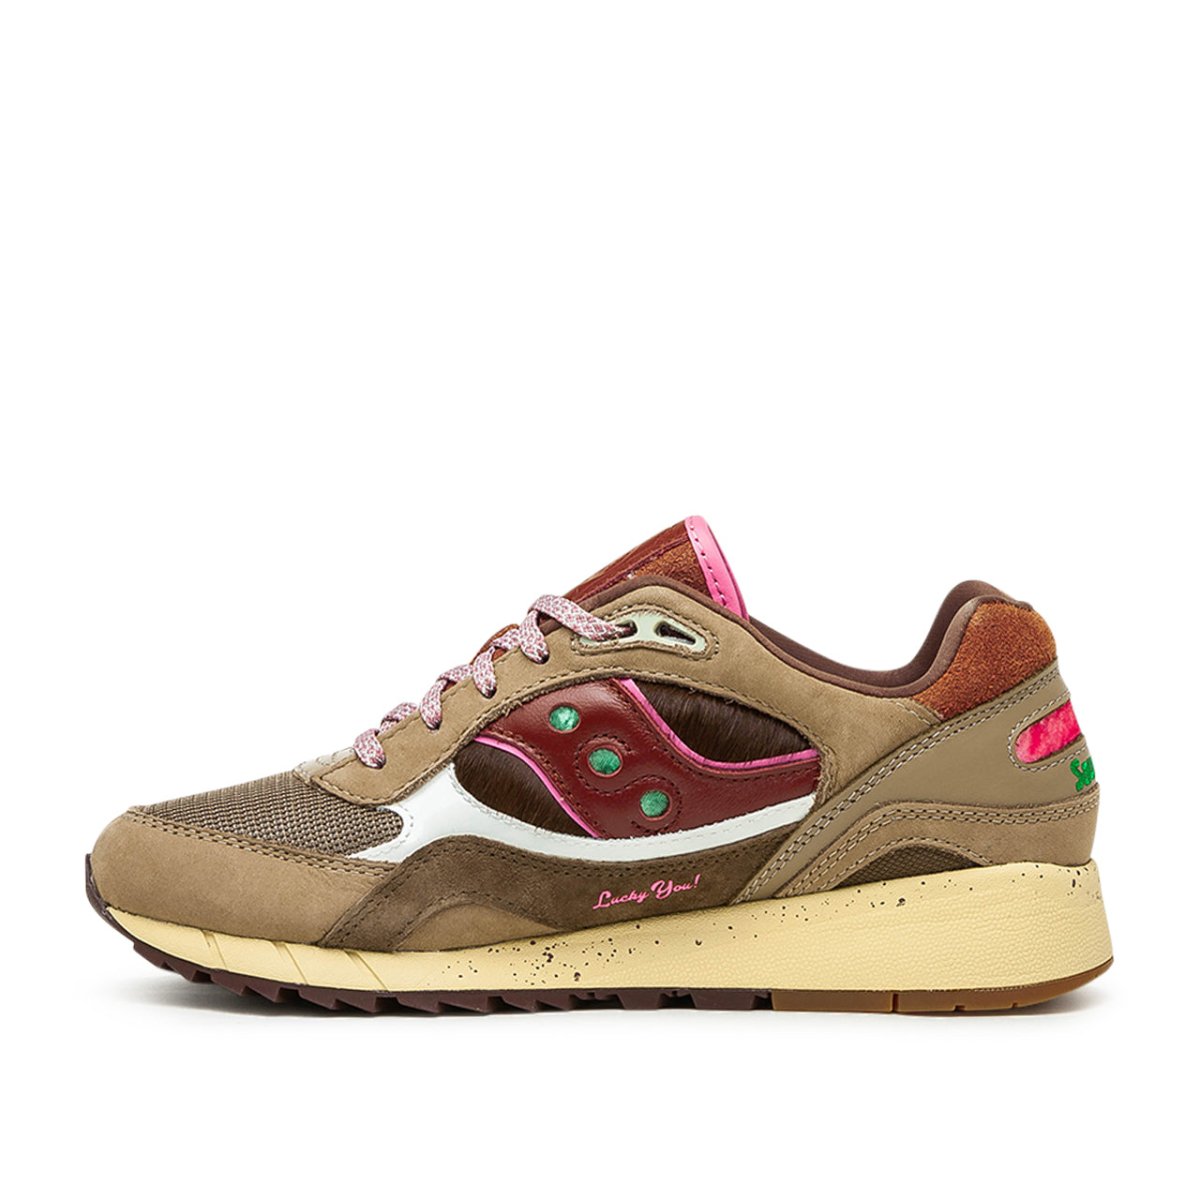 Saucony x Feature Shadow 6000 'Chocolate Chip' (Braun / Rot)  - Allike Store